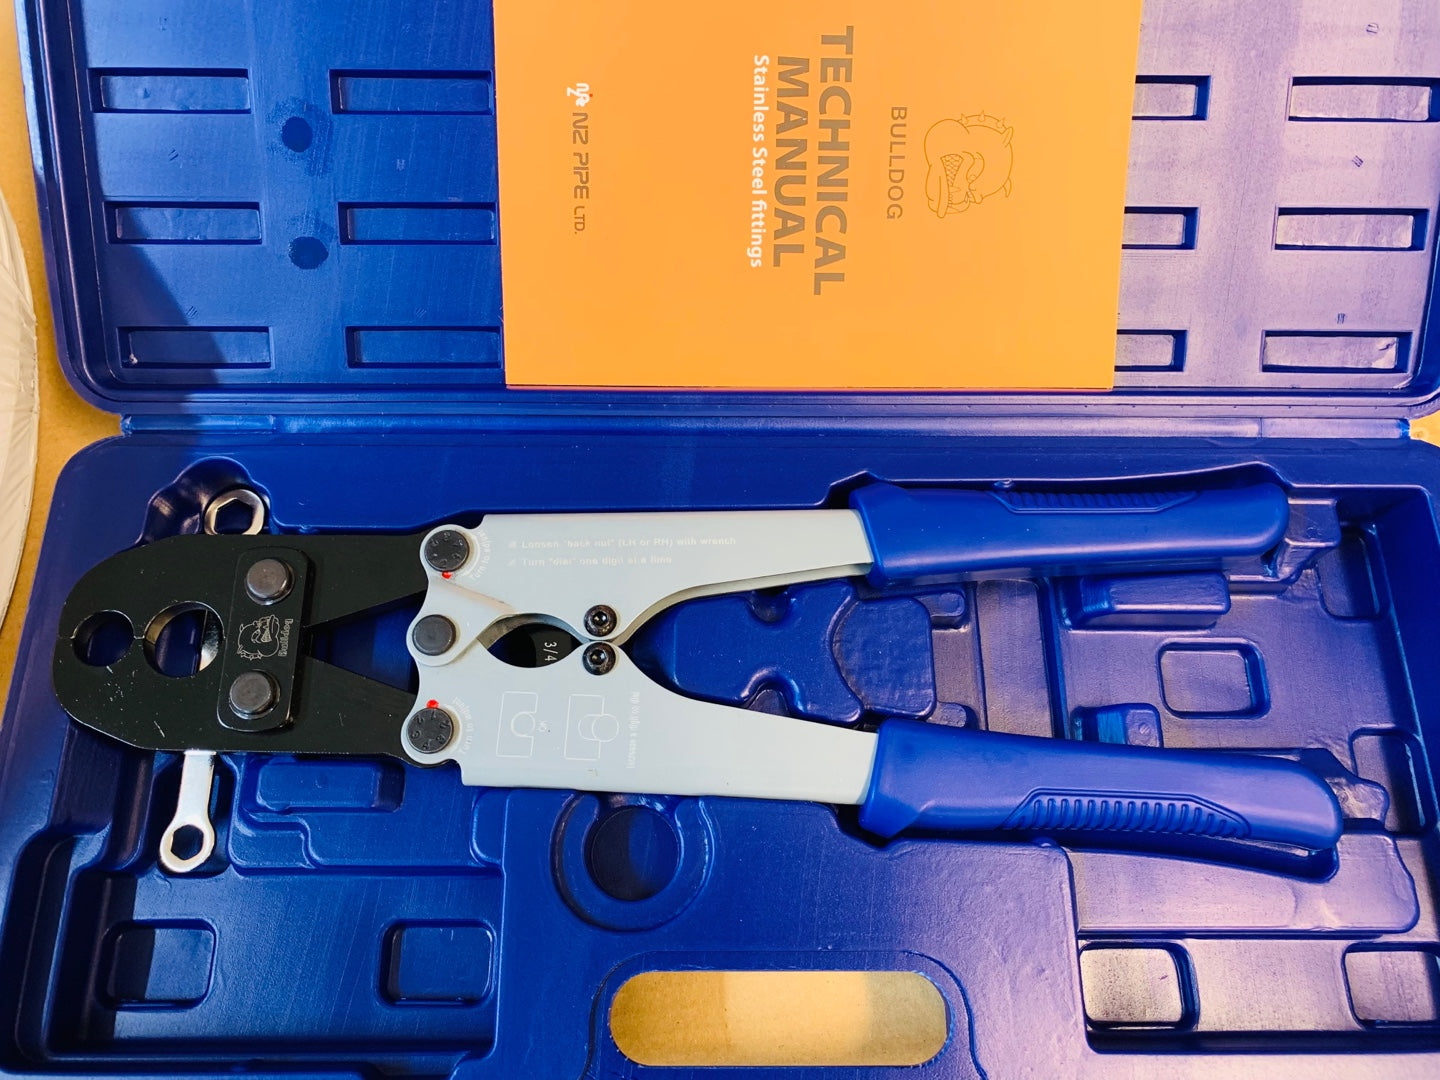 [P36] Crimping Tool + Bathroom Brass fittings Kit ( temporary only 15mm tool available)